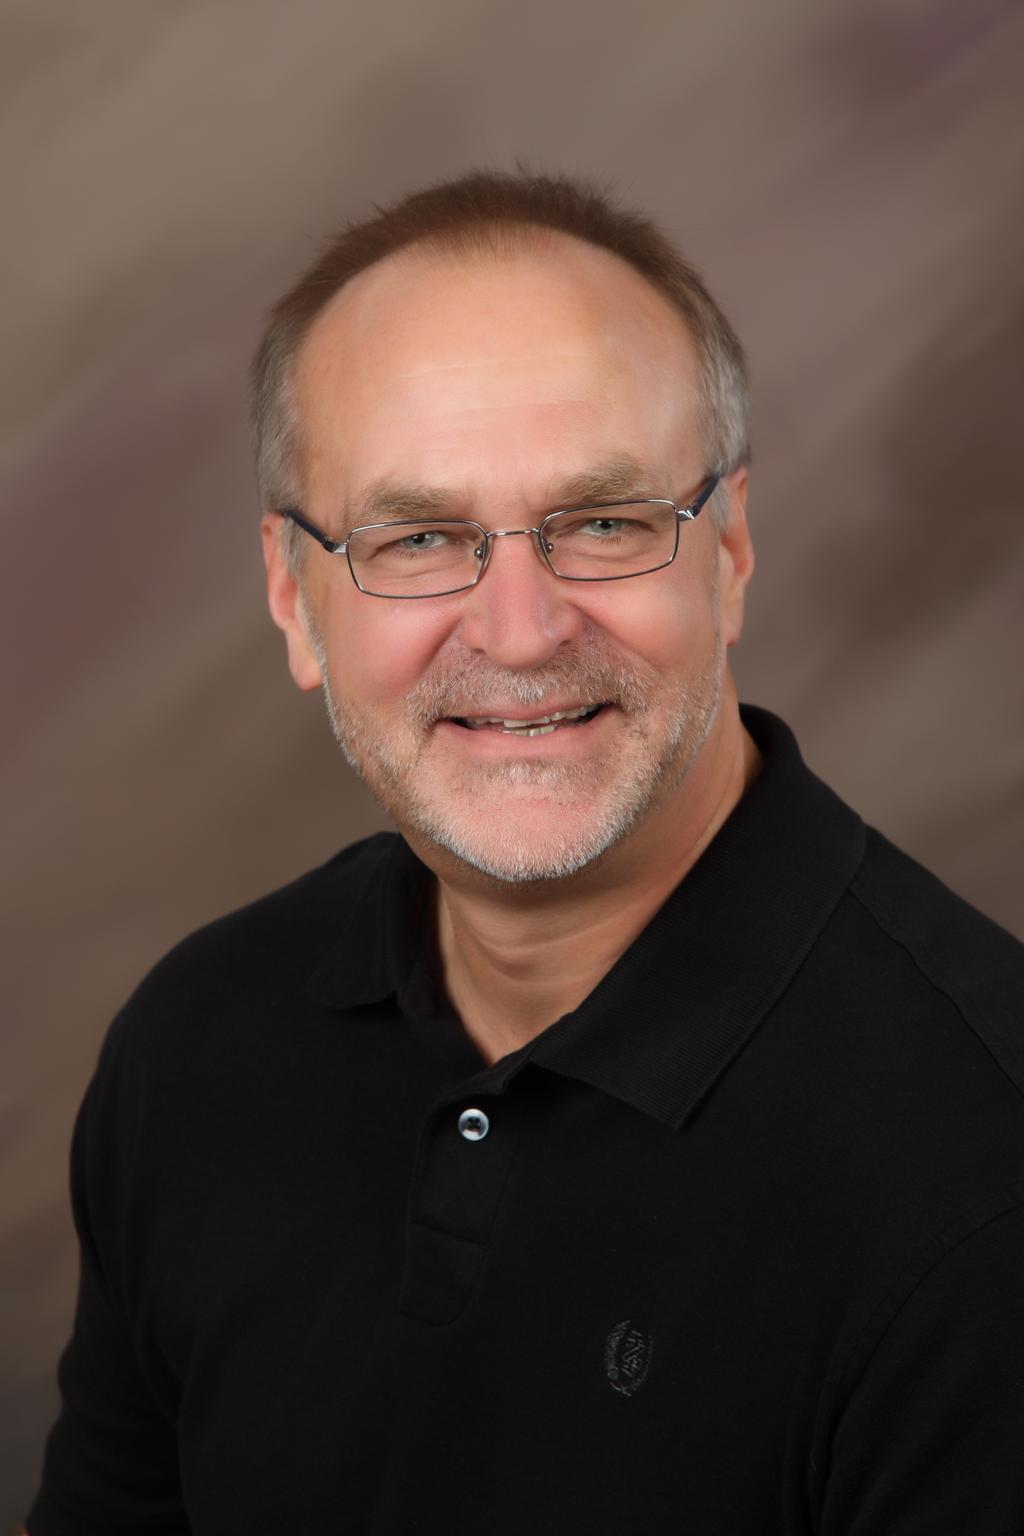 About the Authors: David W. Sundin, Ph.D. Dr. David Sundin has over 30 years' experience working with heat transfer in power electrical systems. A technical and management consultant, Dr.